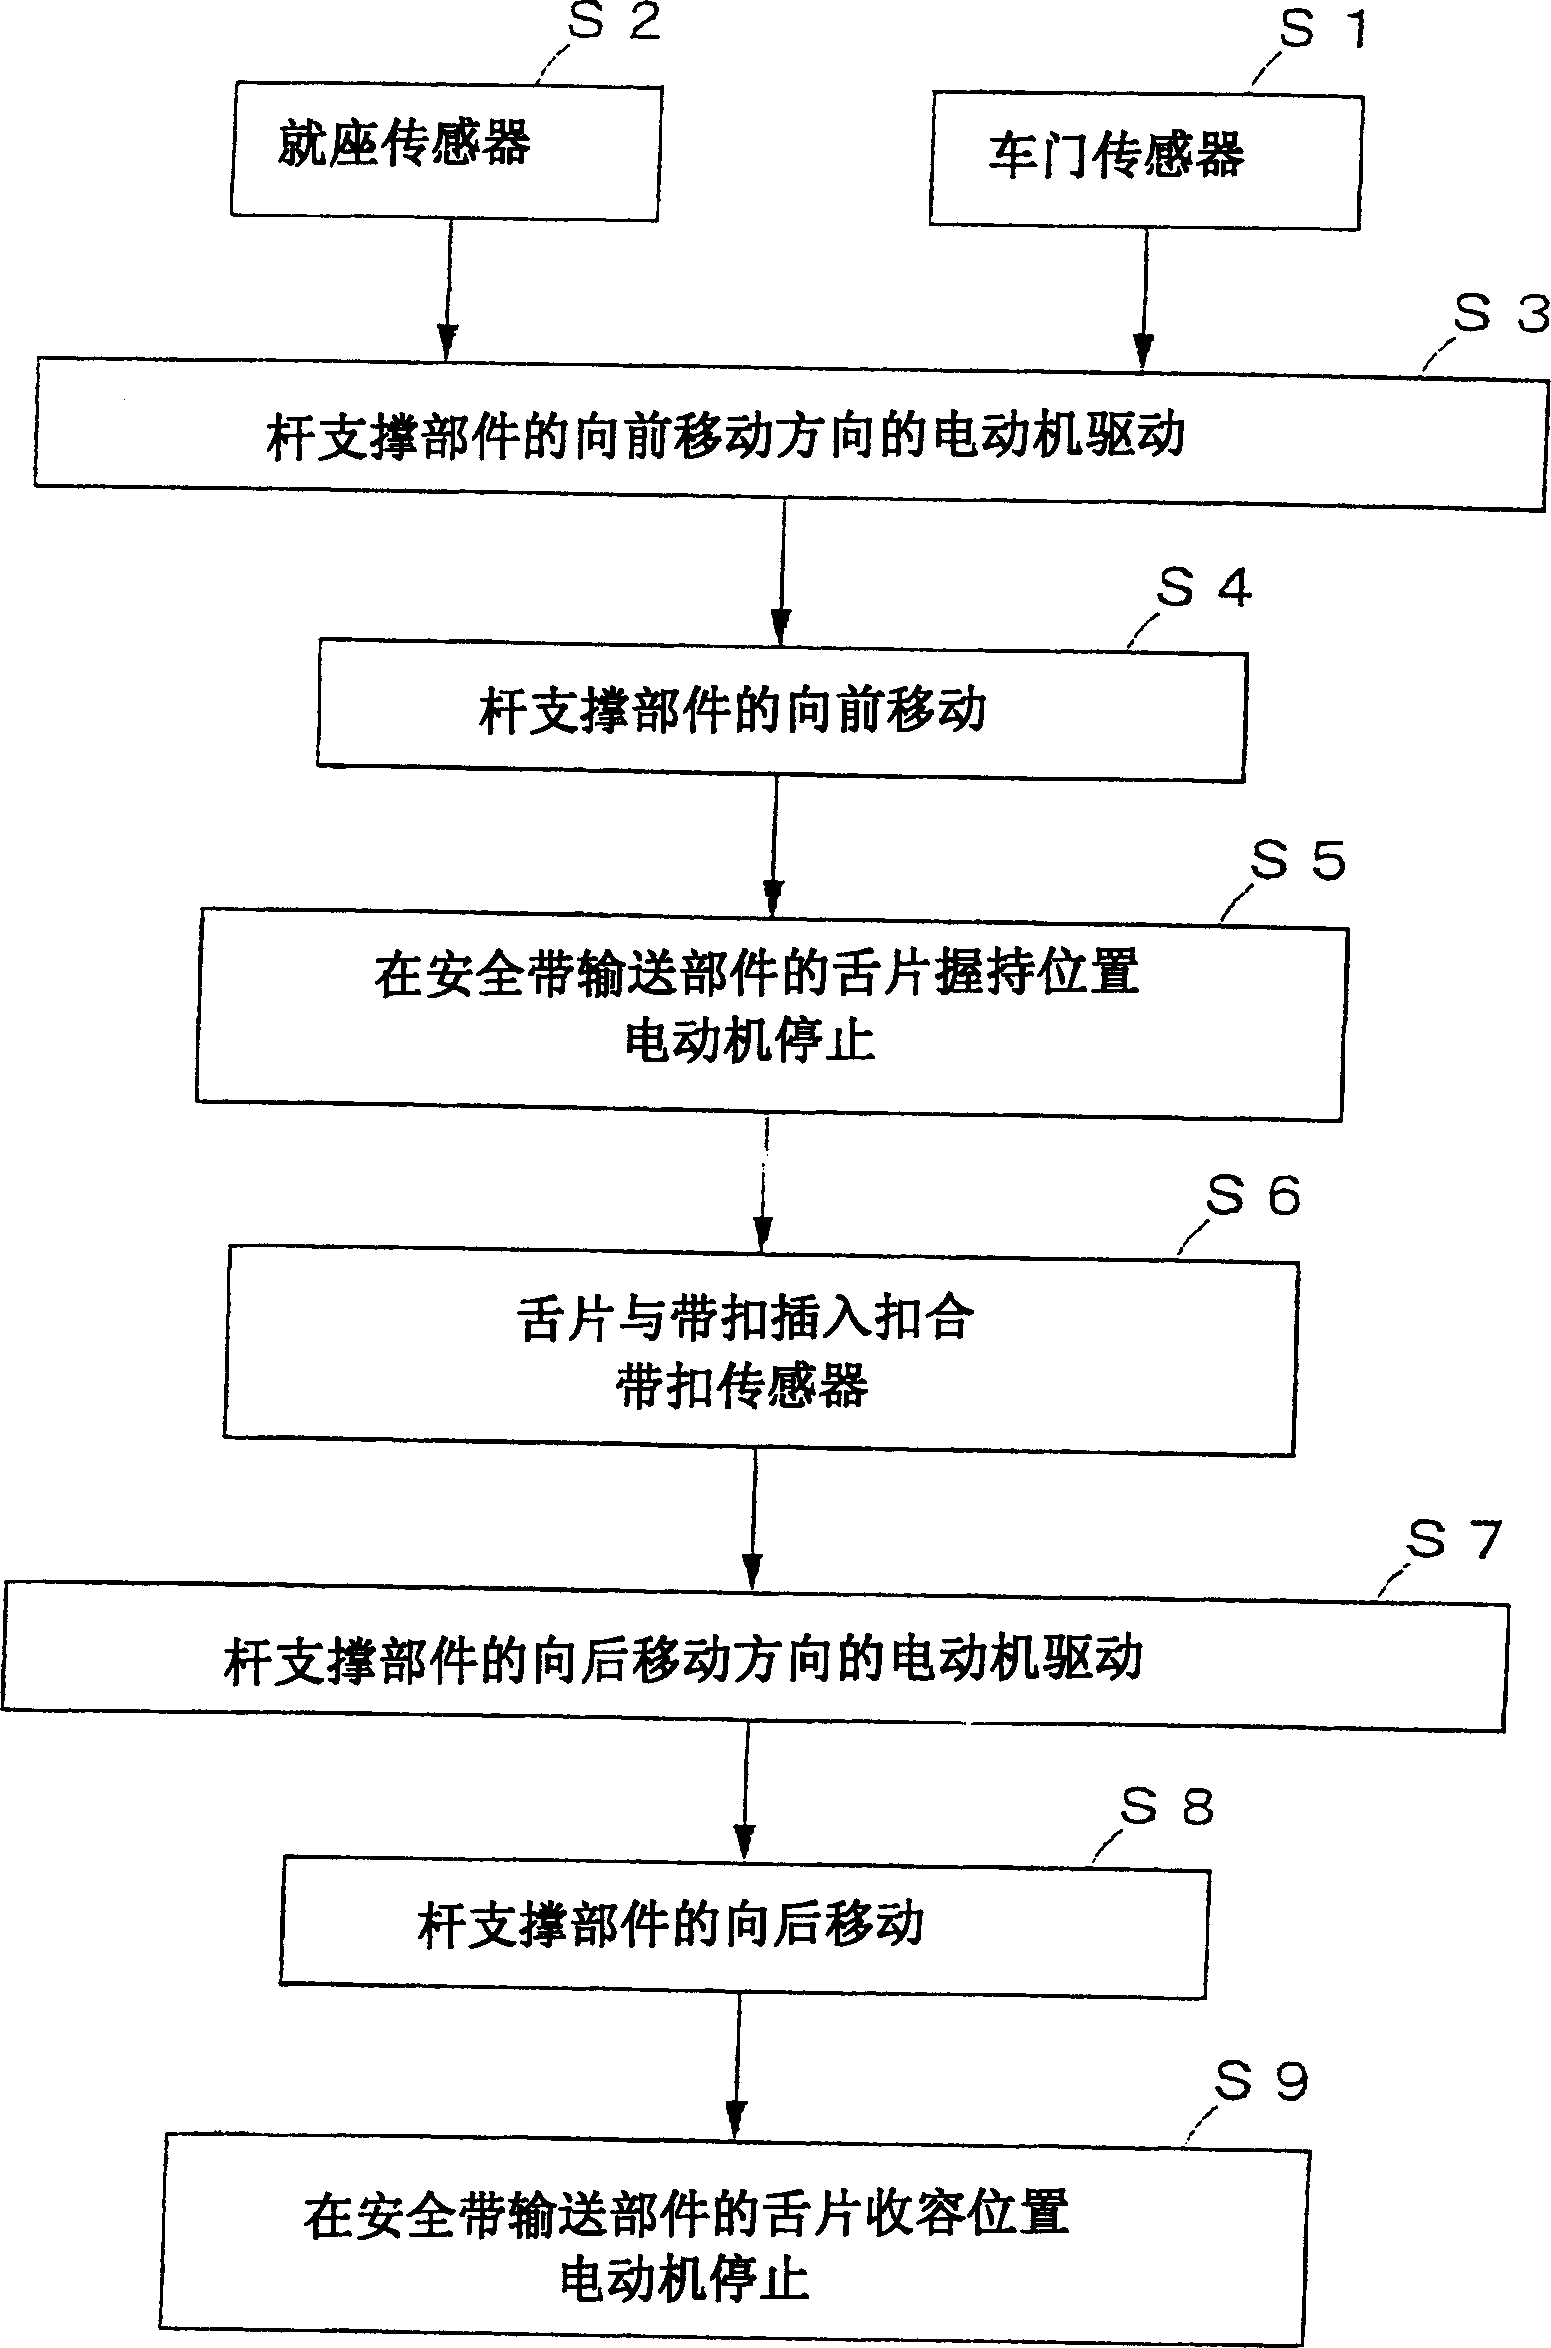 Tongue presenter device and seat belt apparatus employing the same